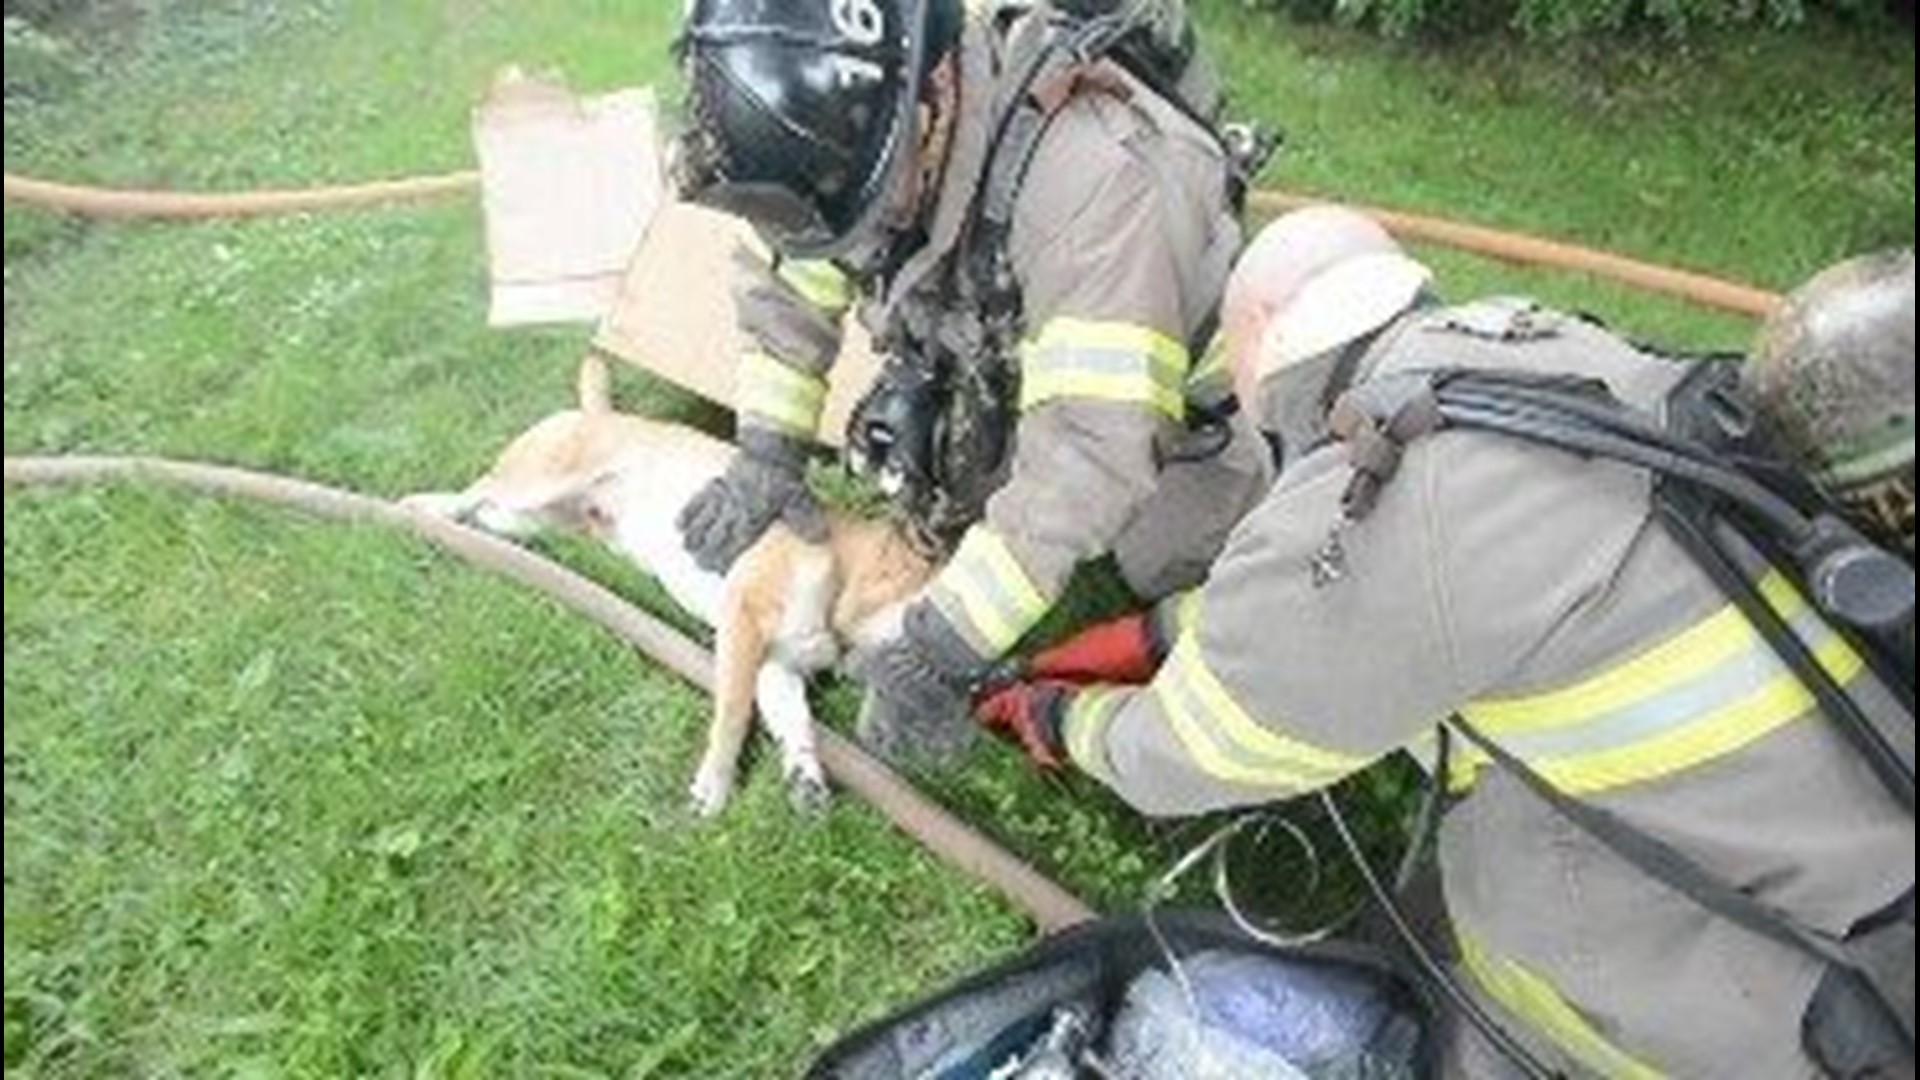 RAW: Toledo firefighters revived dog after house fire